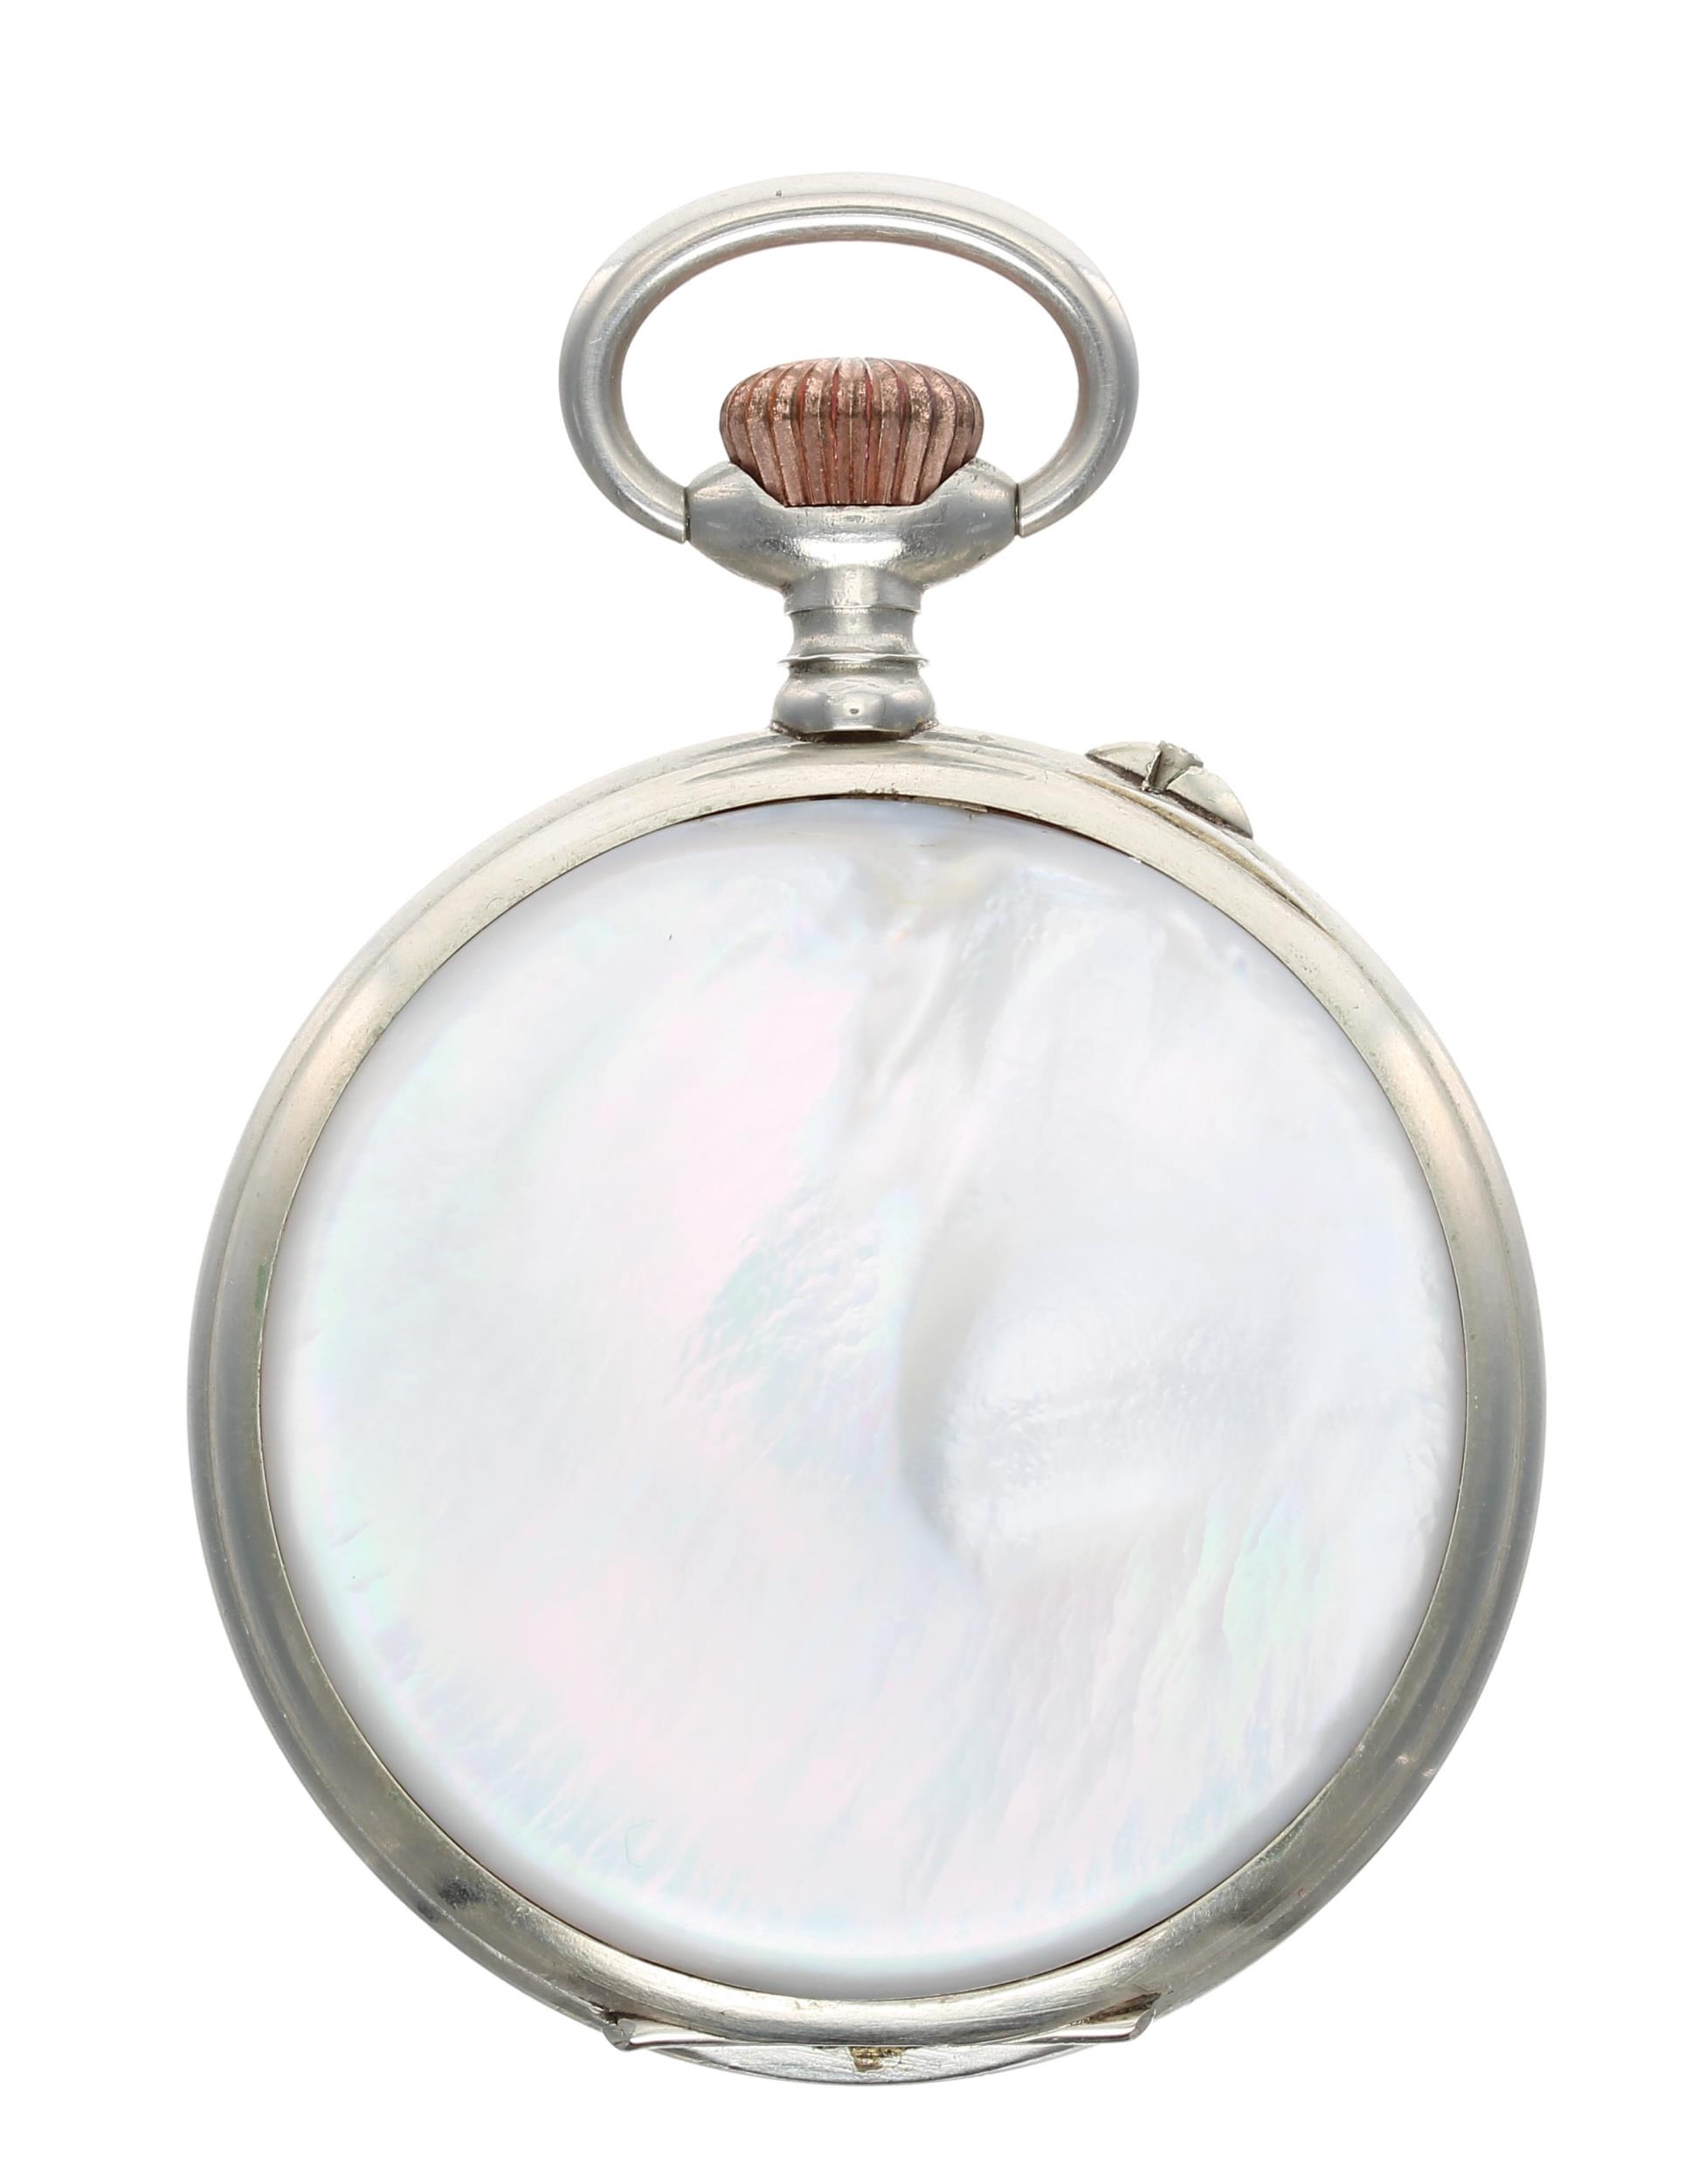 Turkish Market - Swiss Hebdomas type 8 days nickel and mother of pearl cased pocket watch, decorated - Image 4 of 4